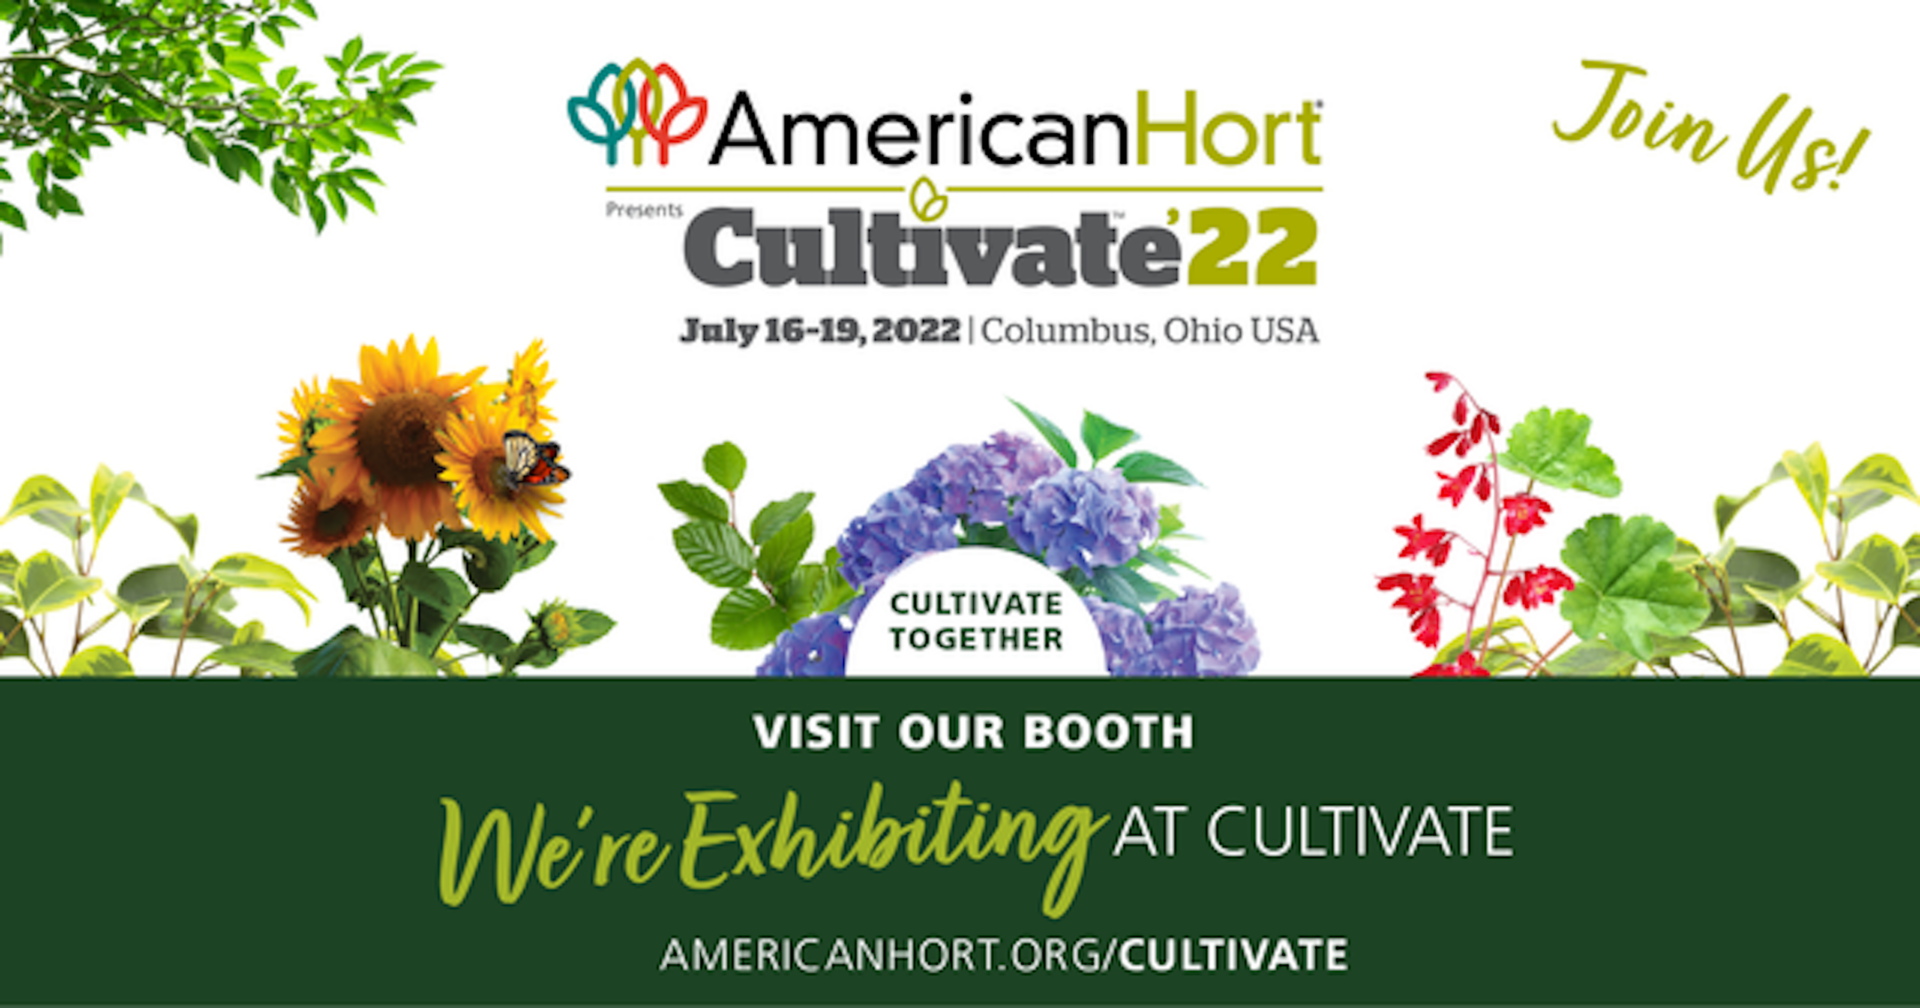 American Hort’s event of the year – Cultivate’22